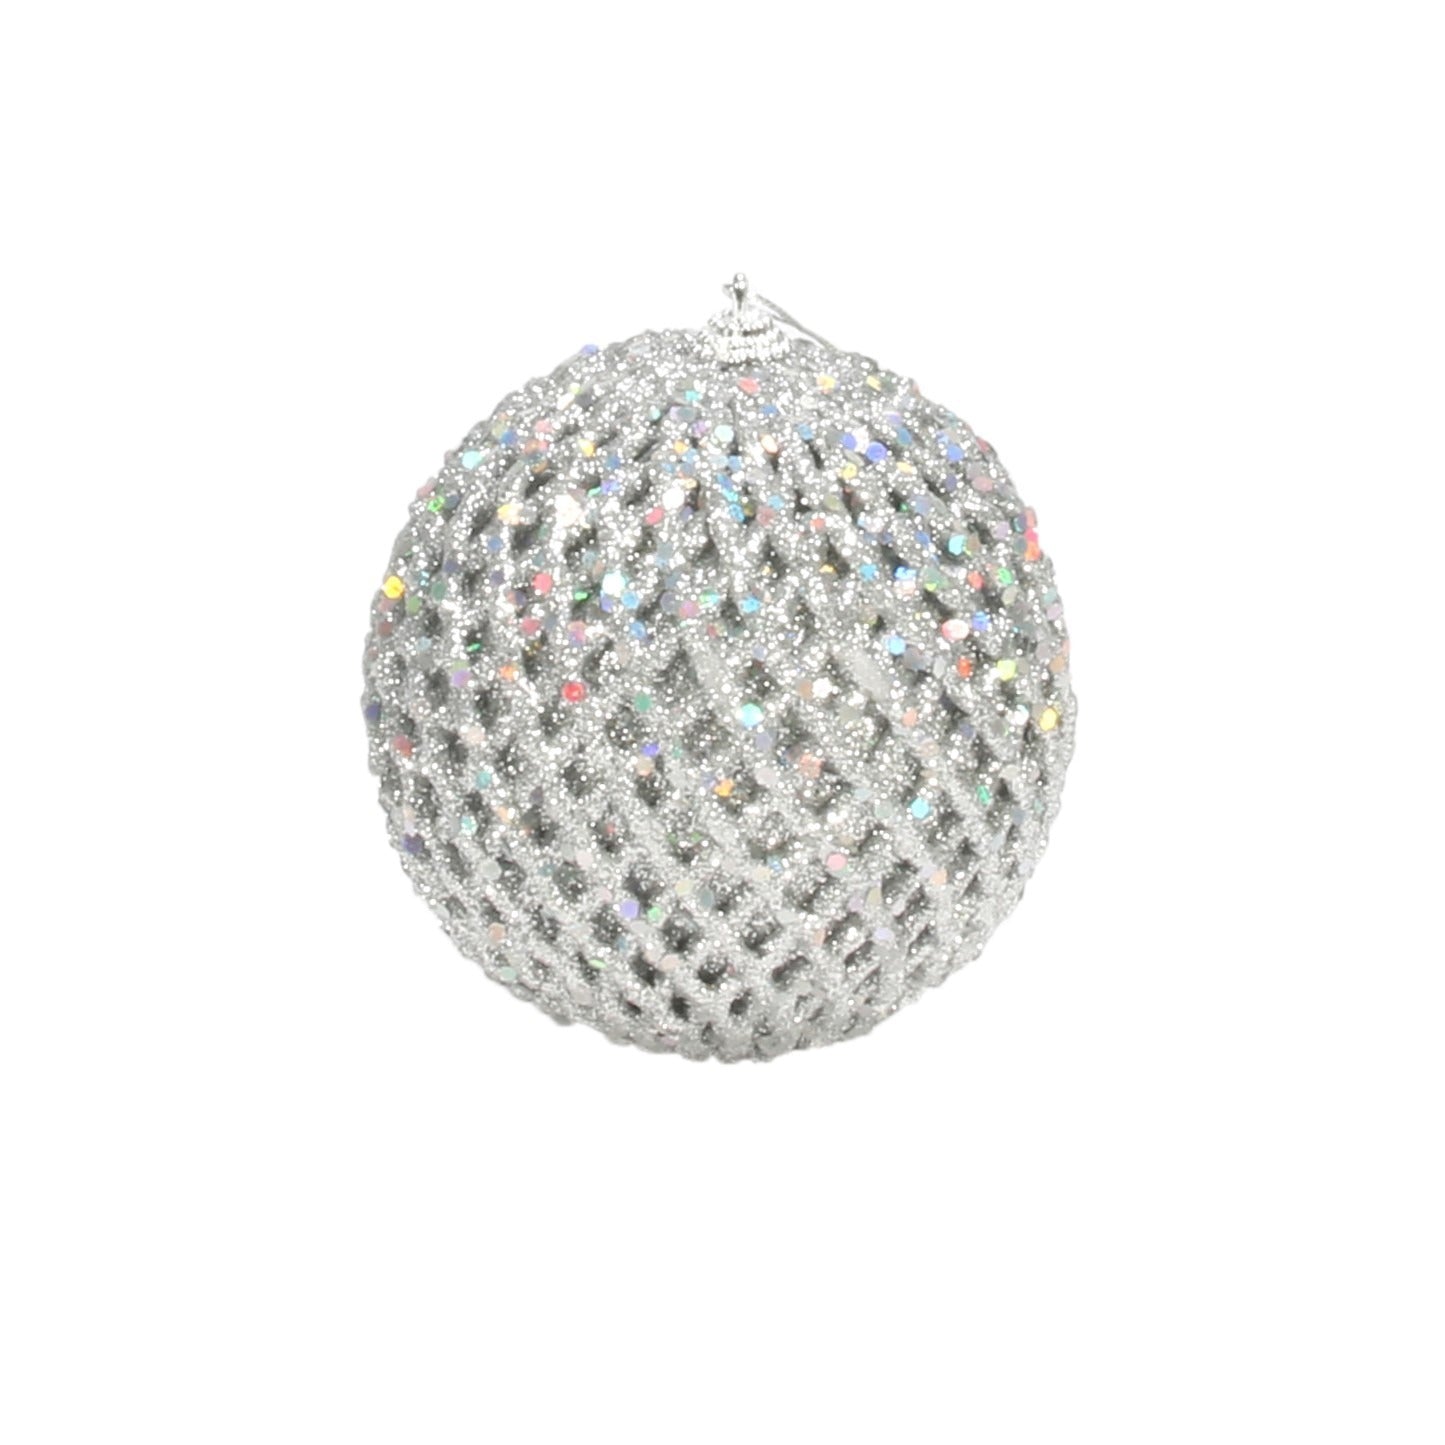 View Silver Glitter and Sequin Bauble Dia10cm information